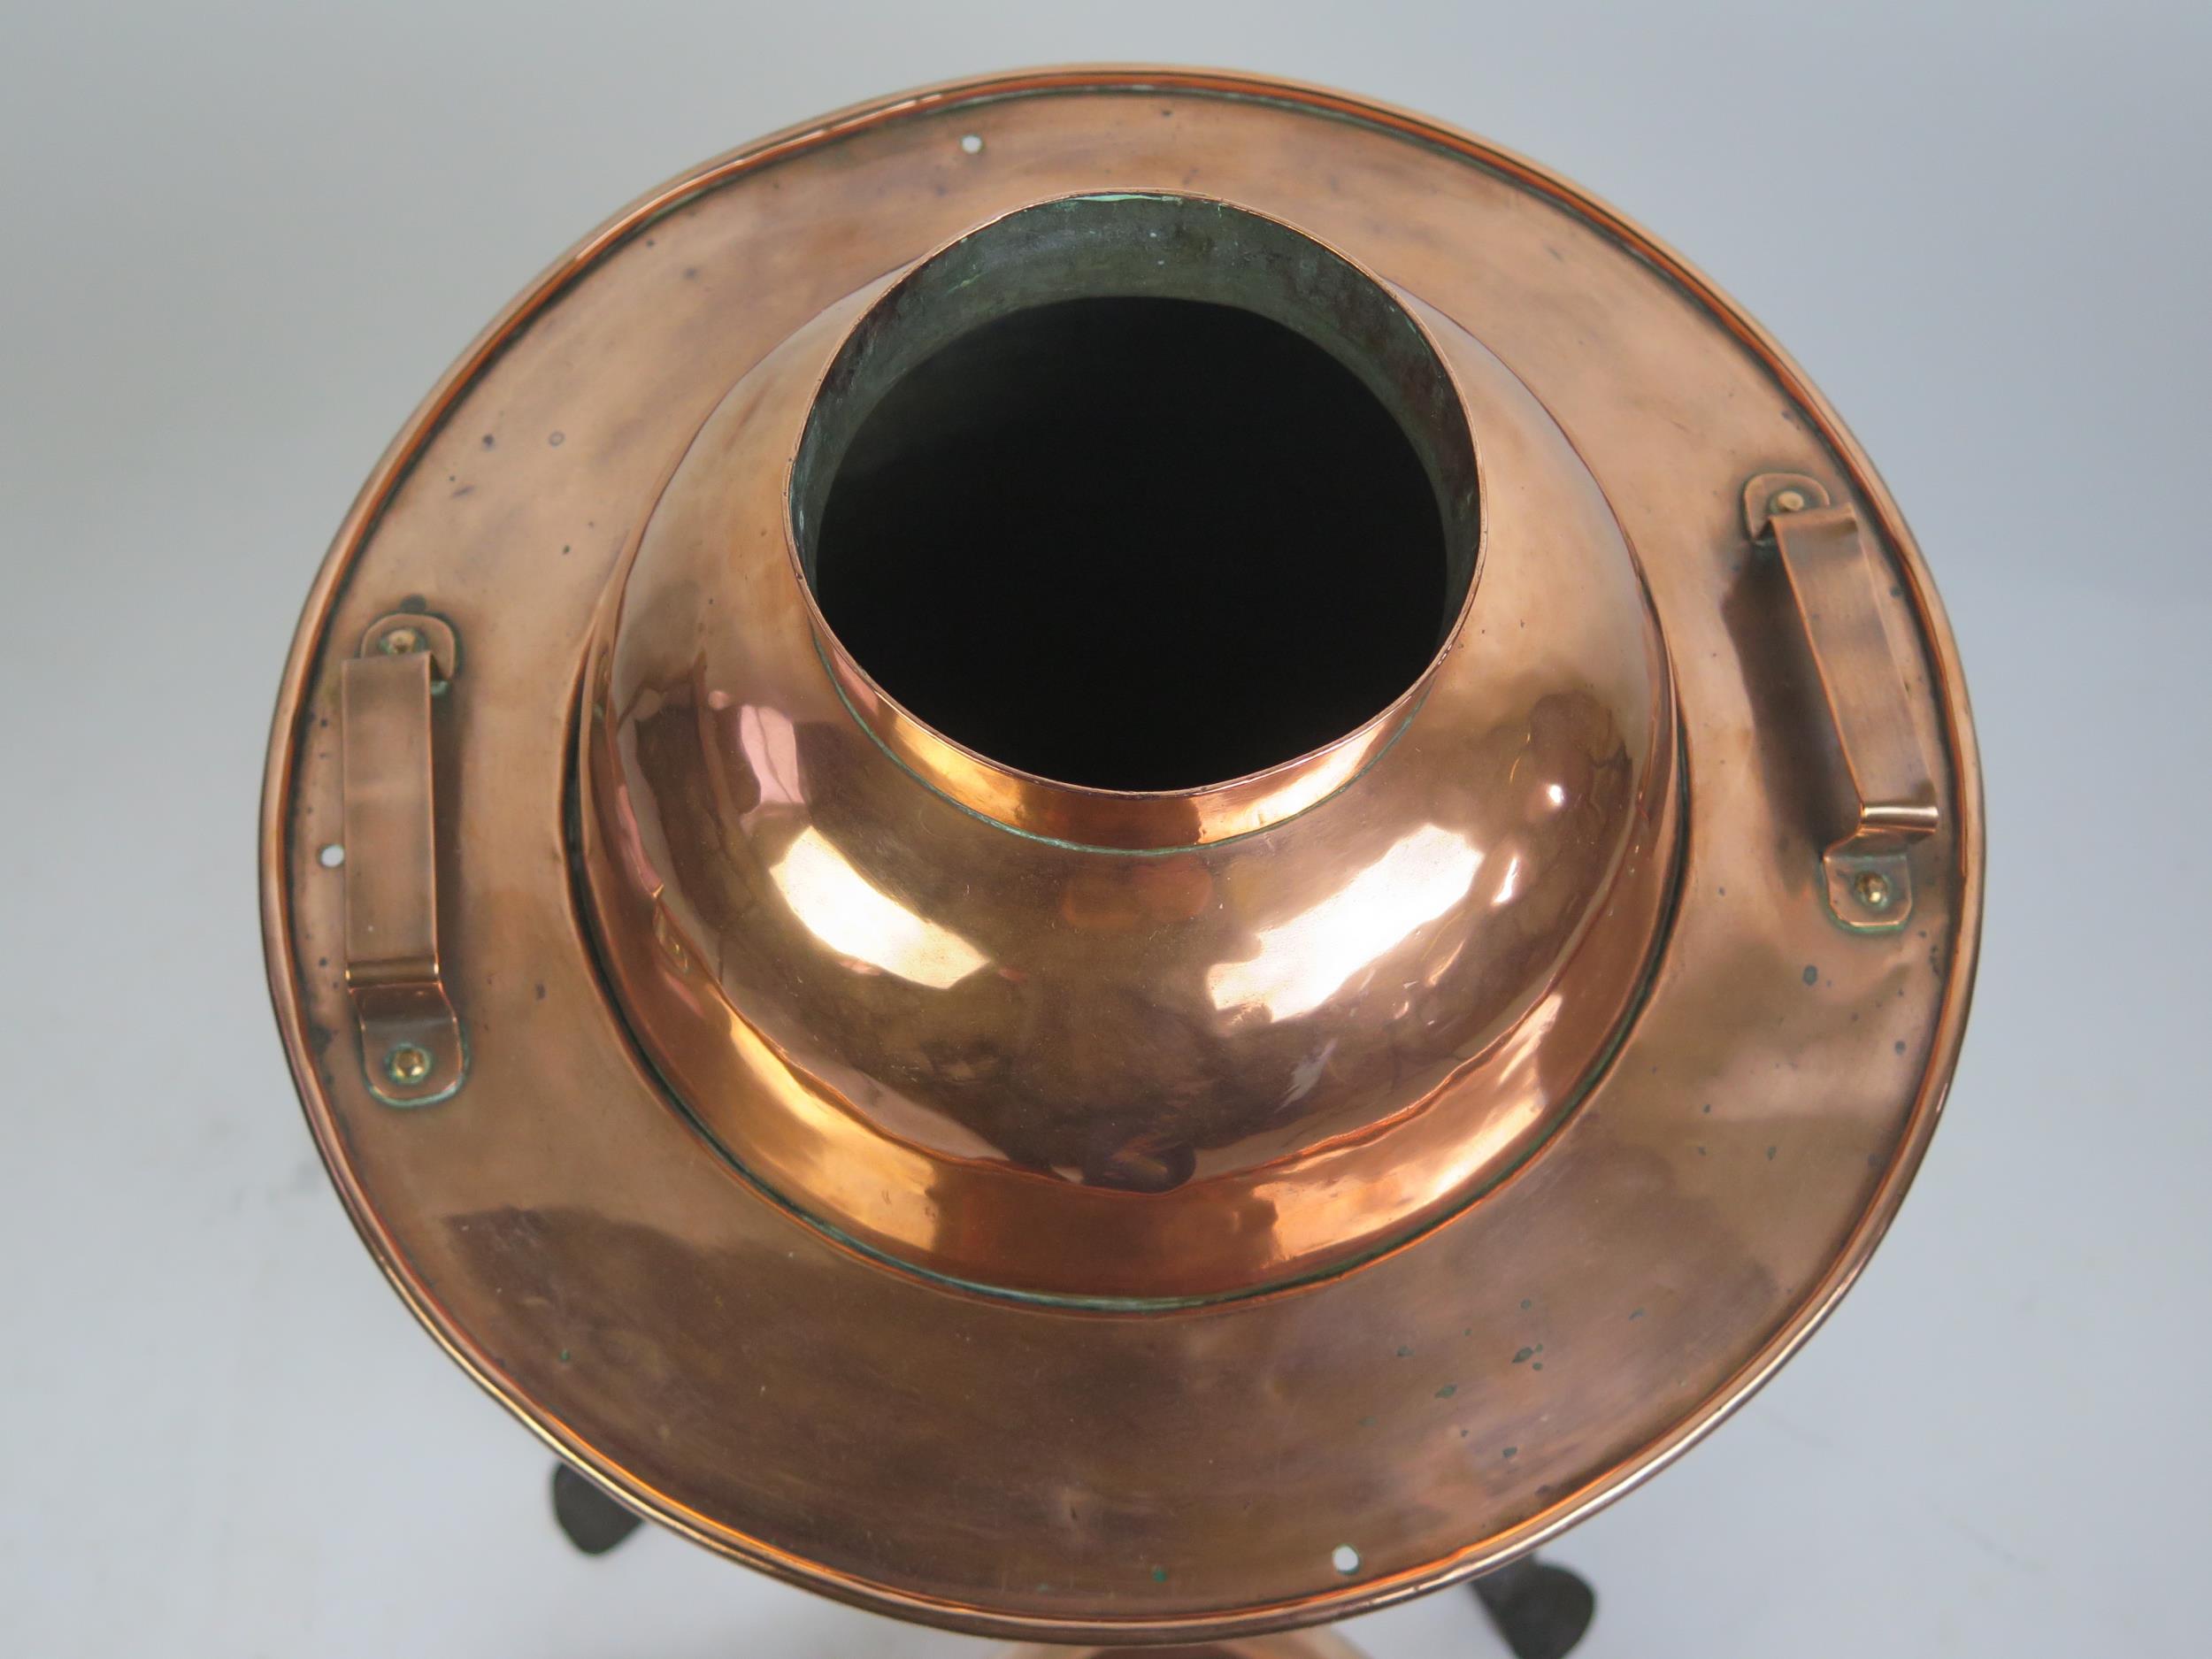 A 19th century French polished copper still, with swept metal spout, with cylindrical reservoir, - Image 4 of 4